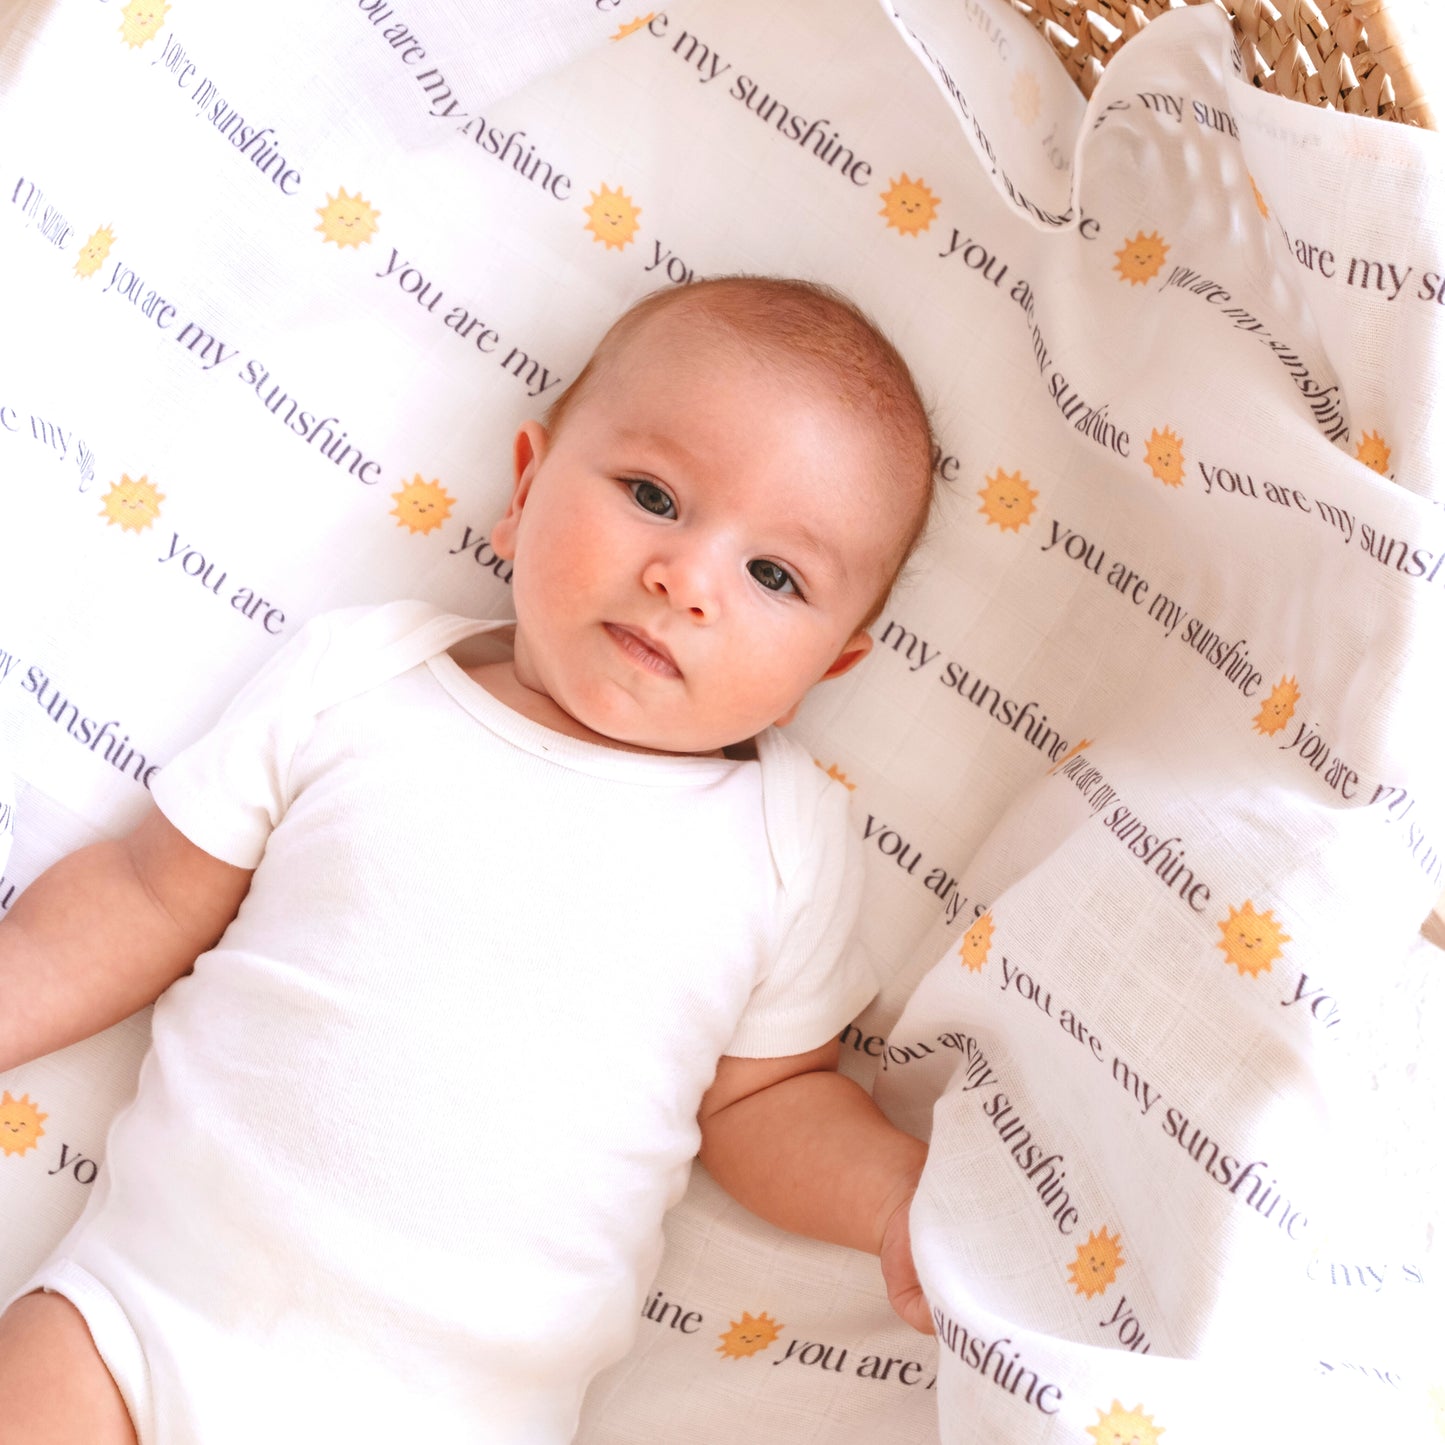 Muslin Swaddle Baby Blanket - You are my sunshine